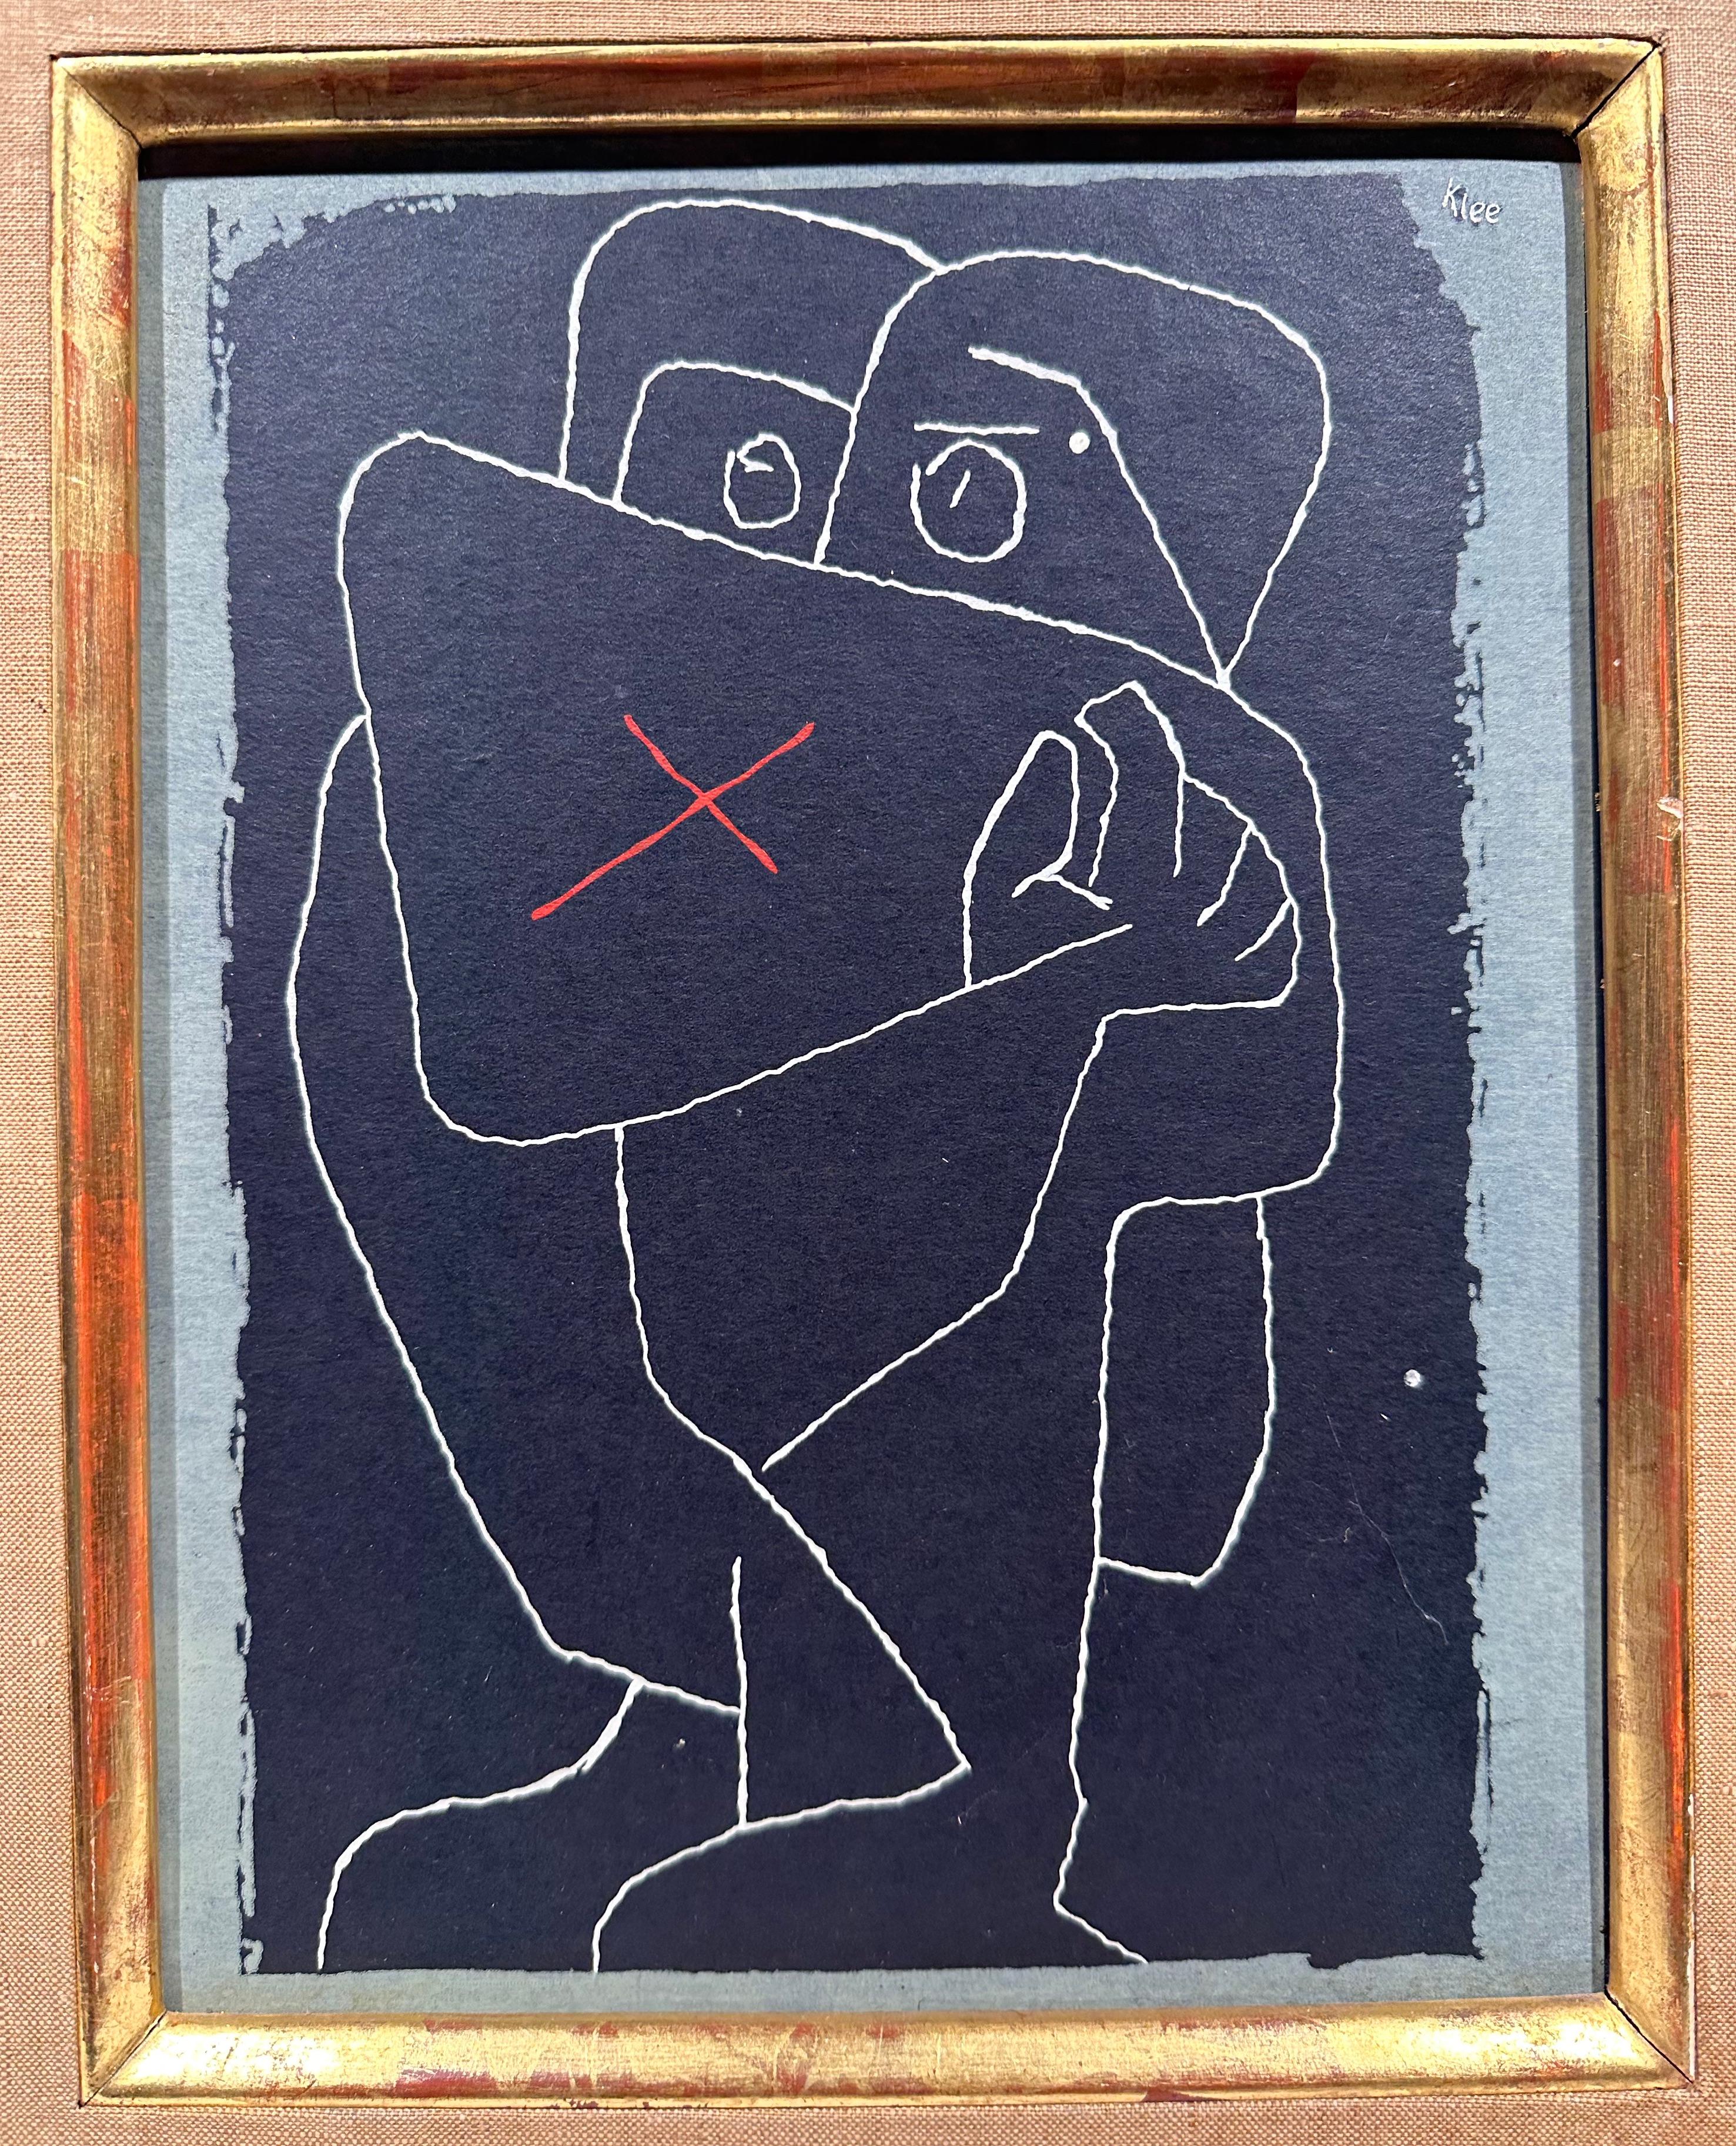 After Paul Klee. The Guardian Angel and The Vigilant Angel, ca. 1955. Screen prints on illustration board. Image measures 7 x 9 inches; 11 1/8 x 13 1/8 inches framed. Signed in the print. Original gilt frames with linen liner. Liners show minor